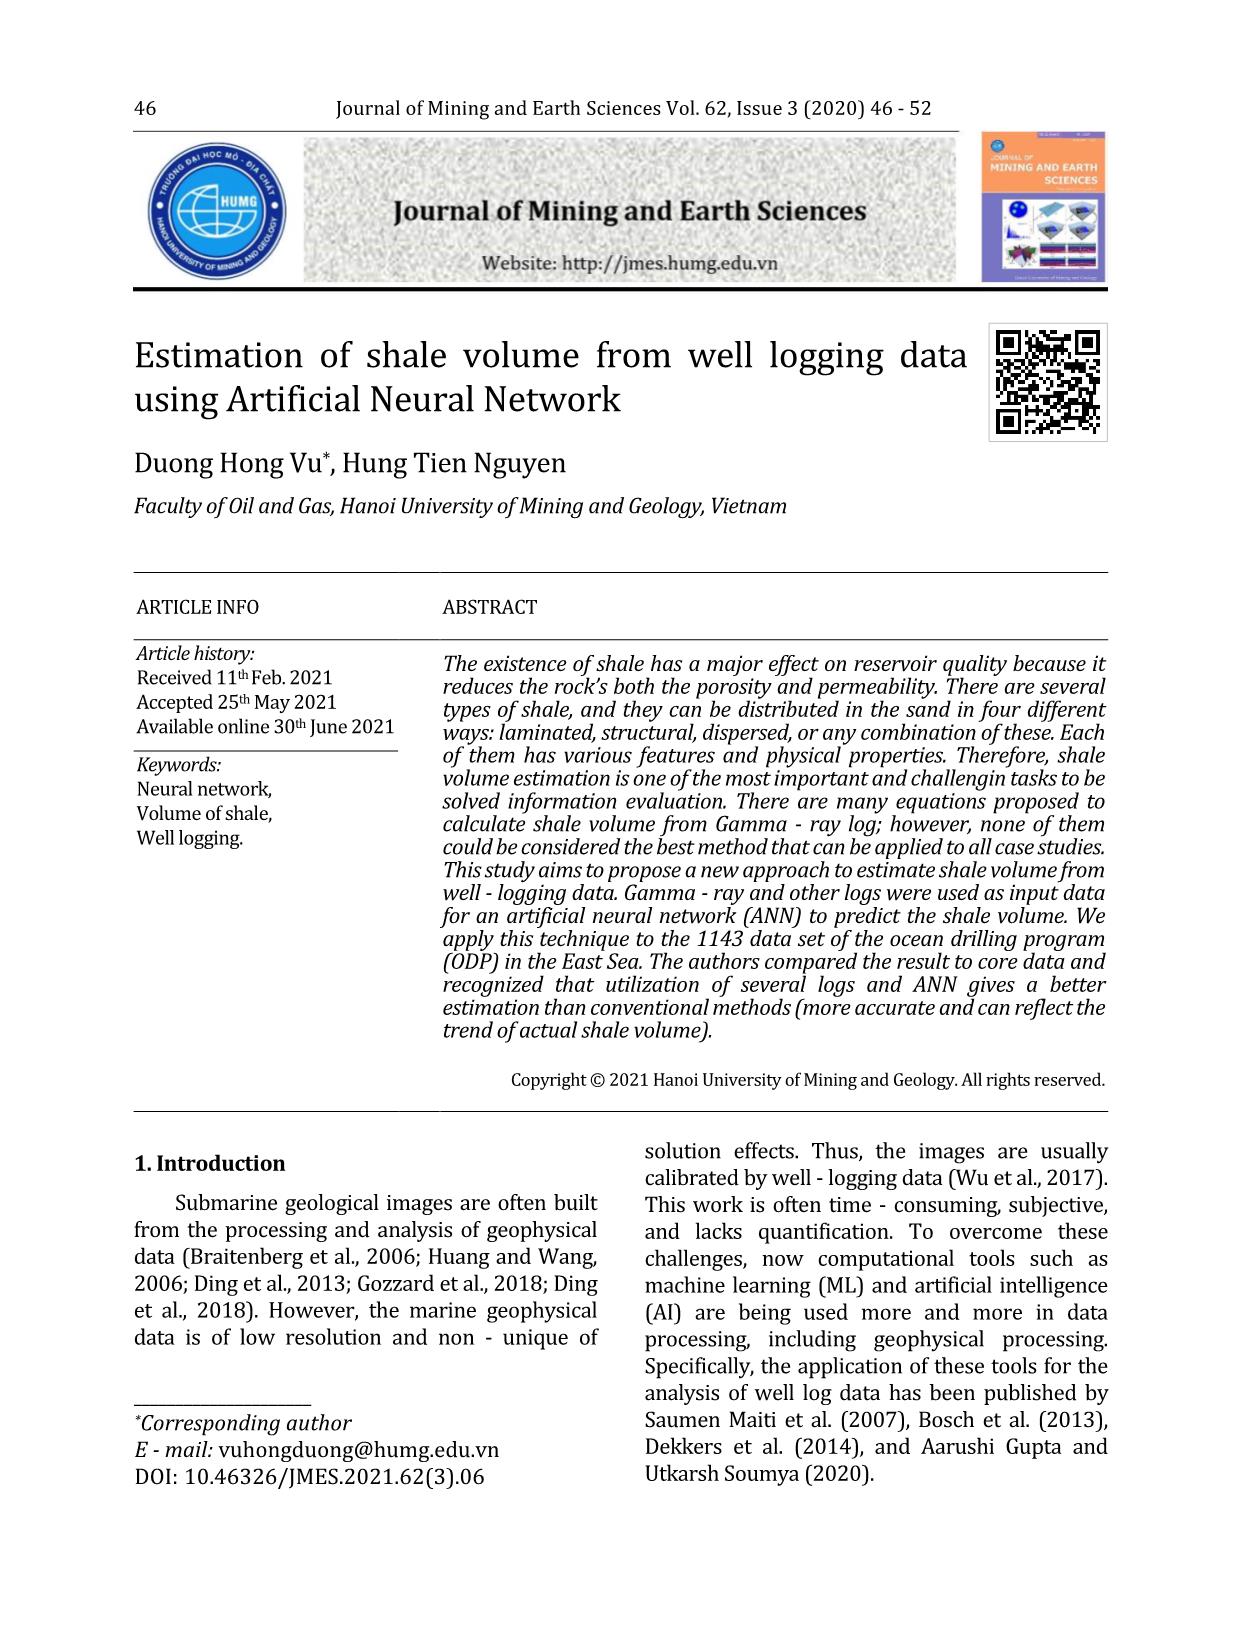 Estimation of shale volume from well logging data using Artificial Neural Network trang 1